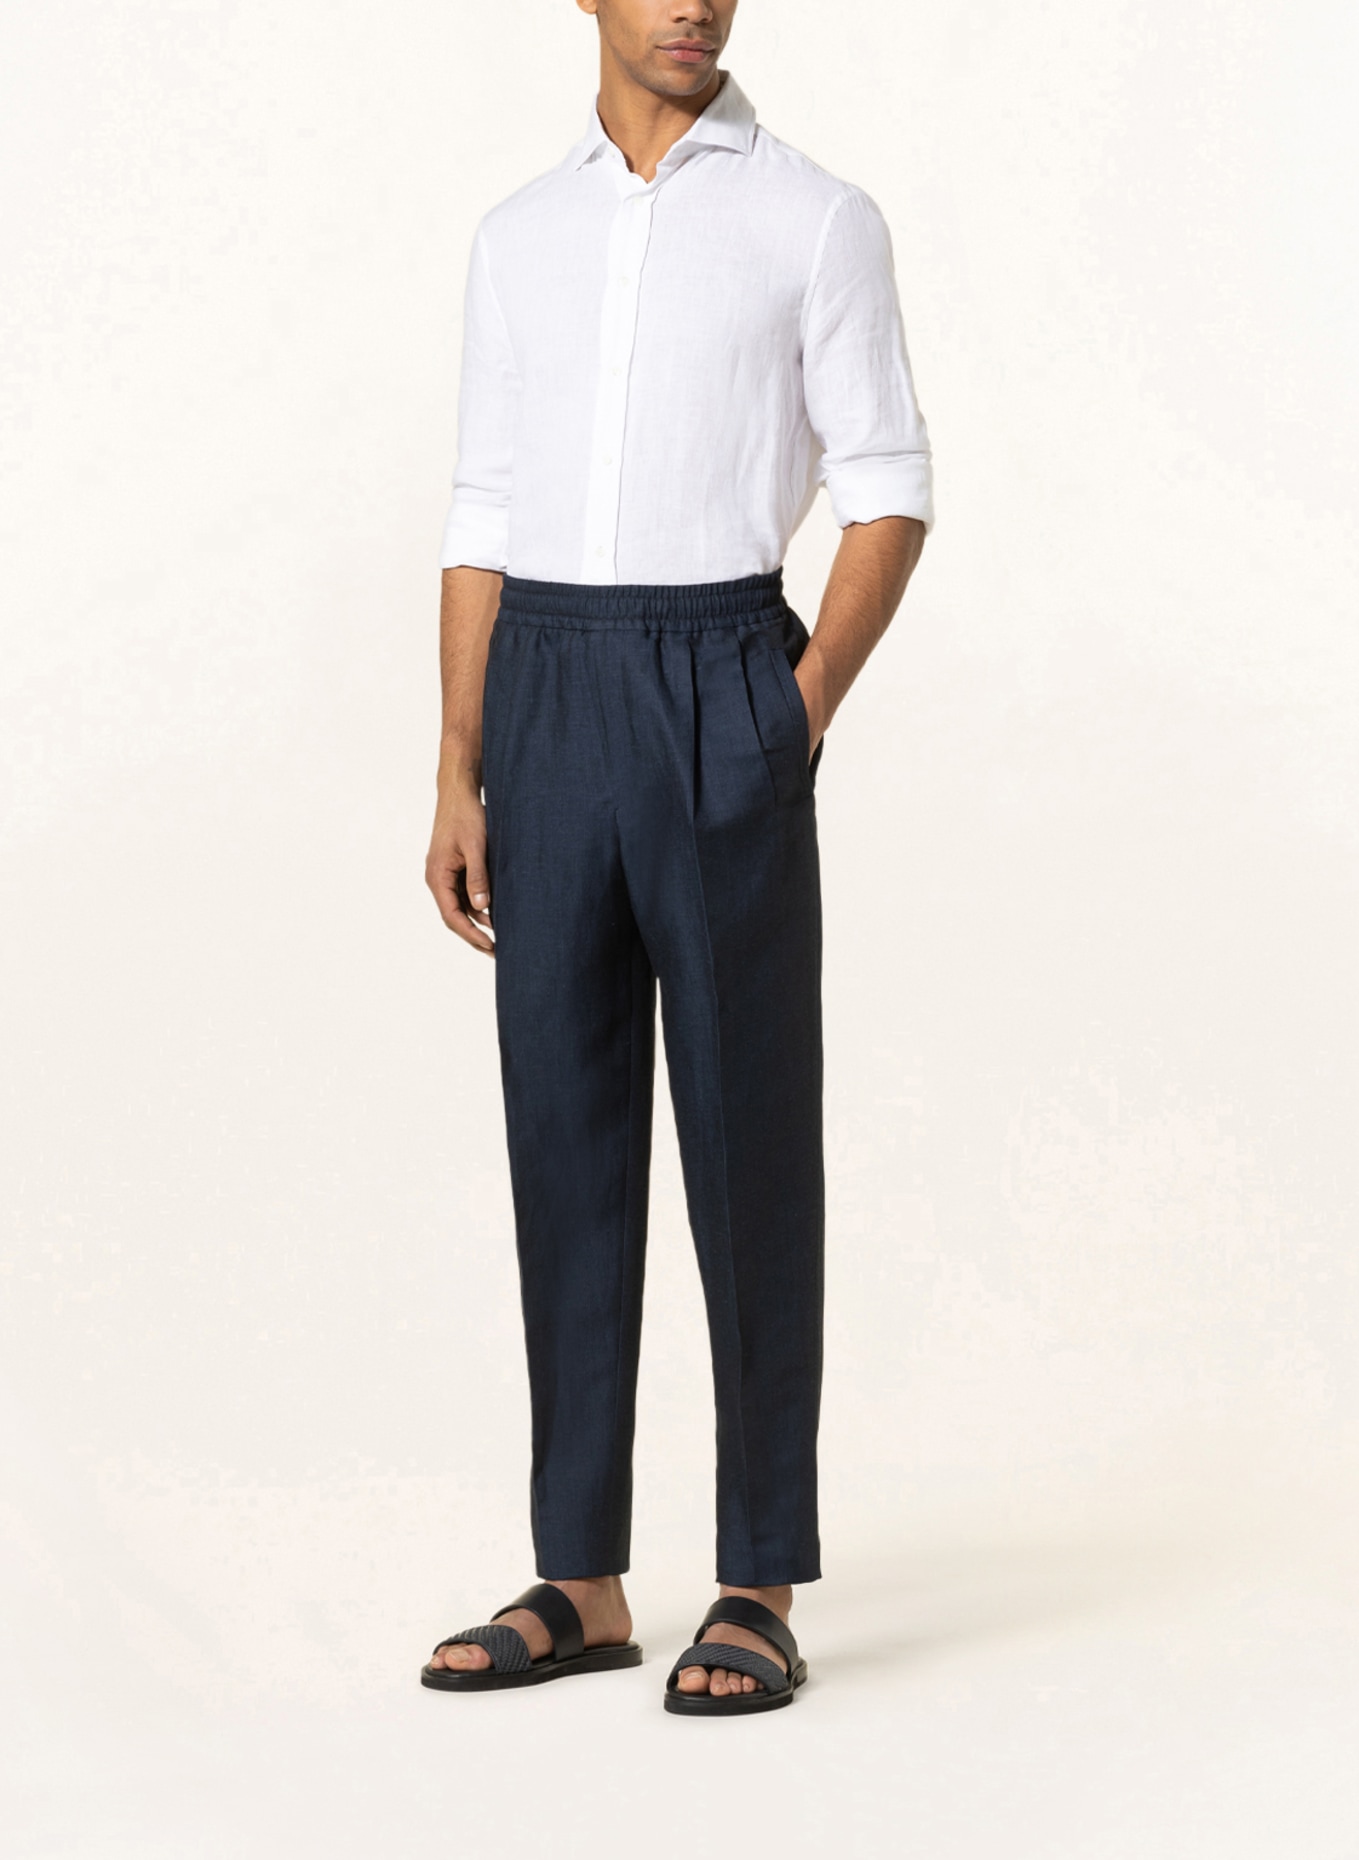 ZEGNA Pants in jogger style with linen, Color: DARK BLUE (Image 2)